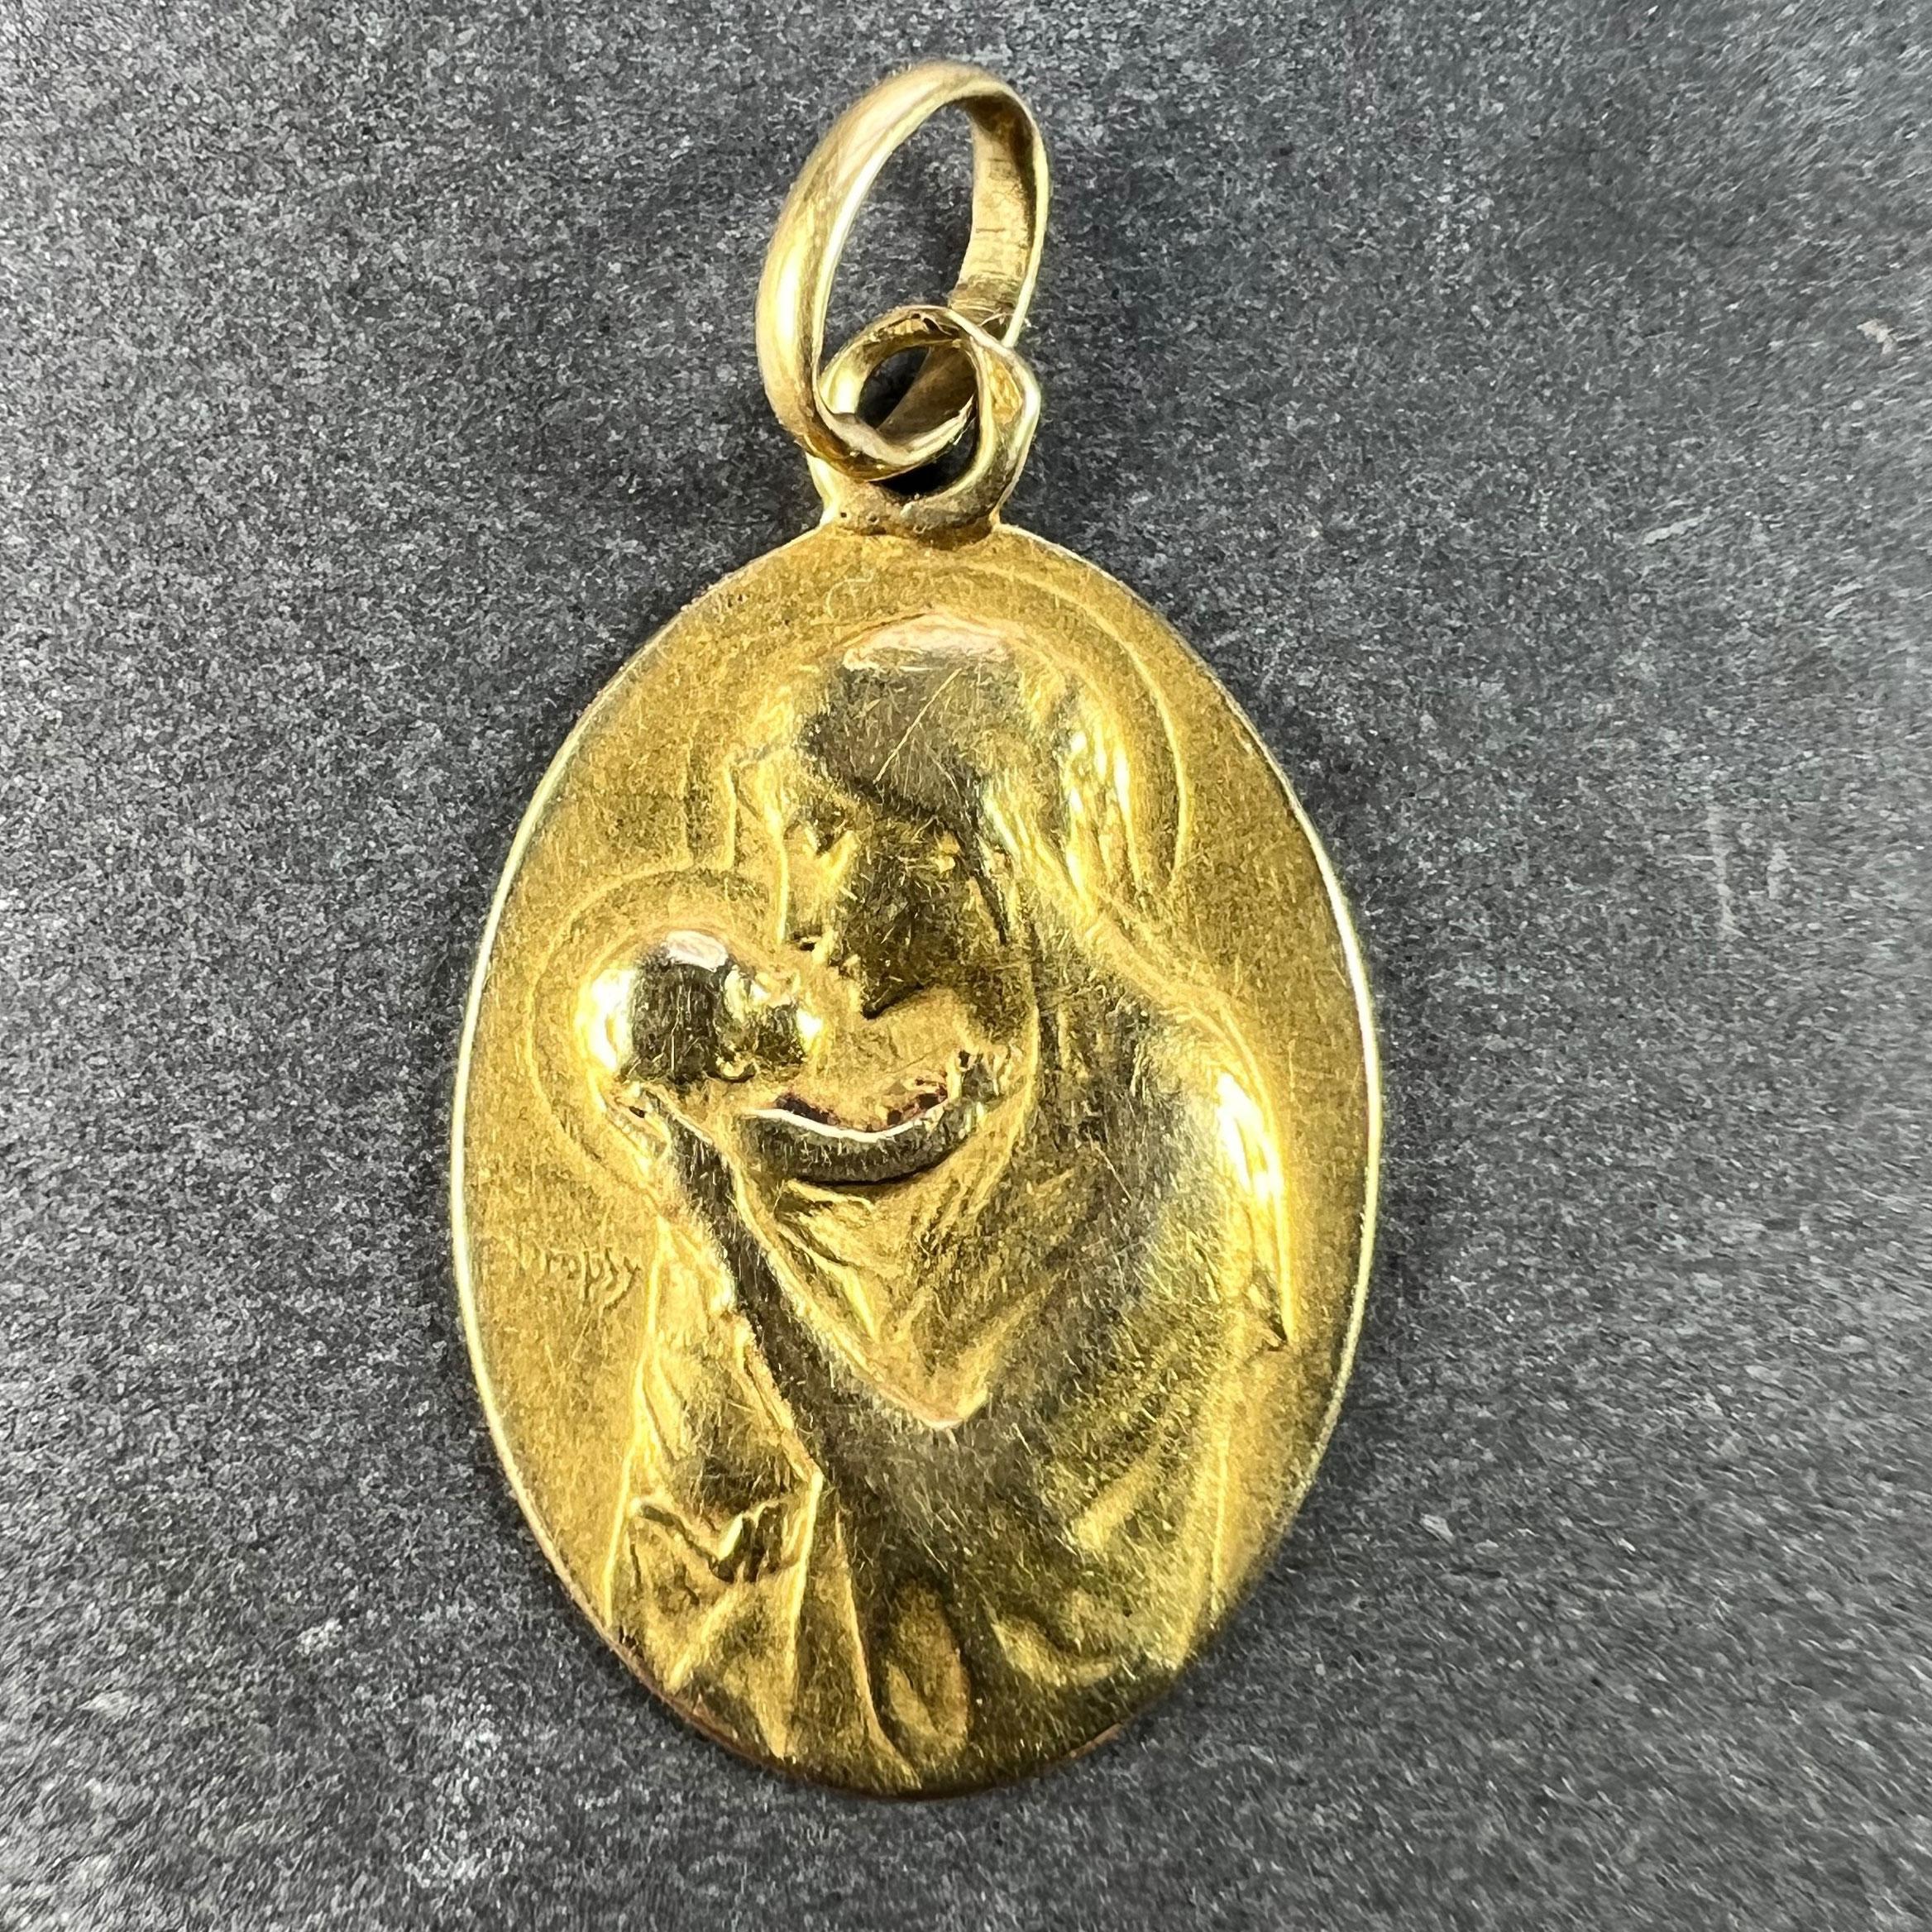 A French 18 karat (18K) yellow gold charm pendant designed as an oval medal depicting the Madonna and Child, signed E. Dropsy. The reverse depicts a spray of roses and lily of the valley and the phrase 'Mater Dei' (Mother of God) and is engraved